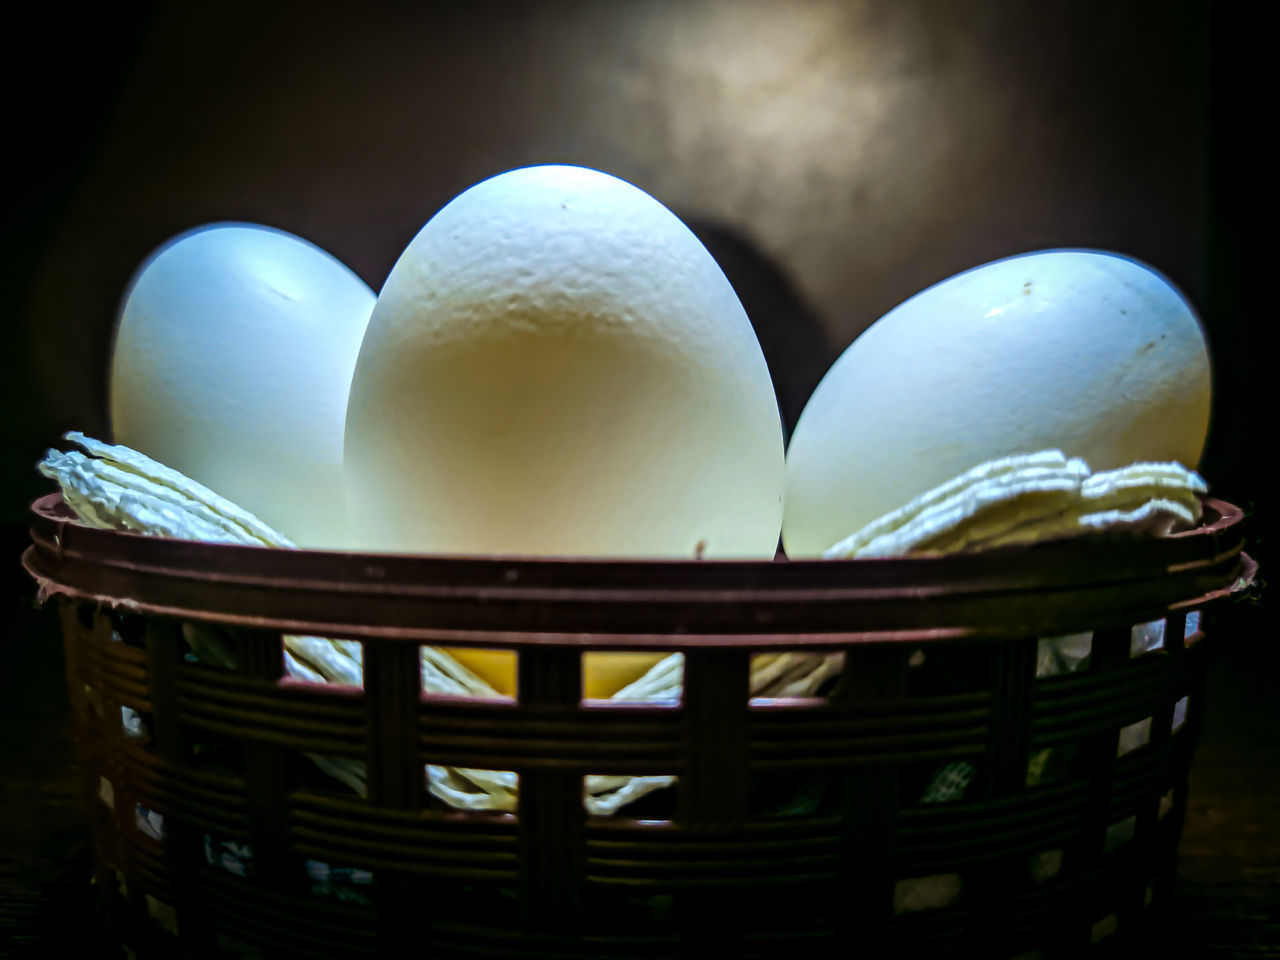 CLOSE-UP OF EGGS IN GLASS